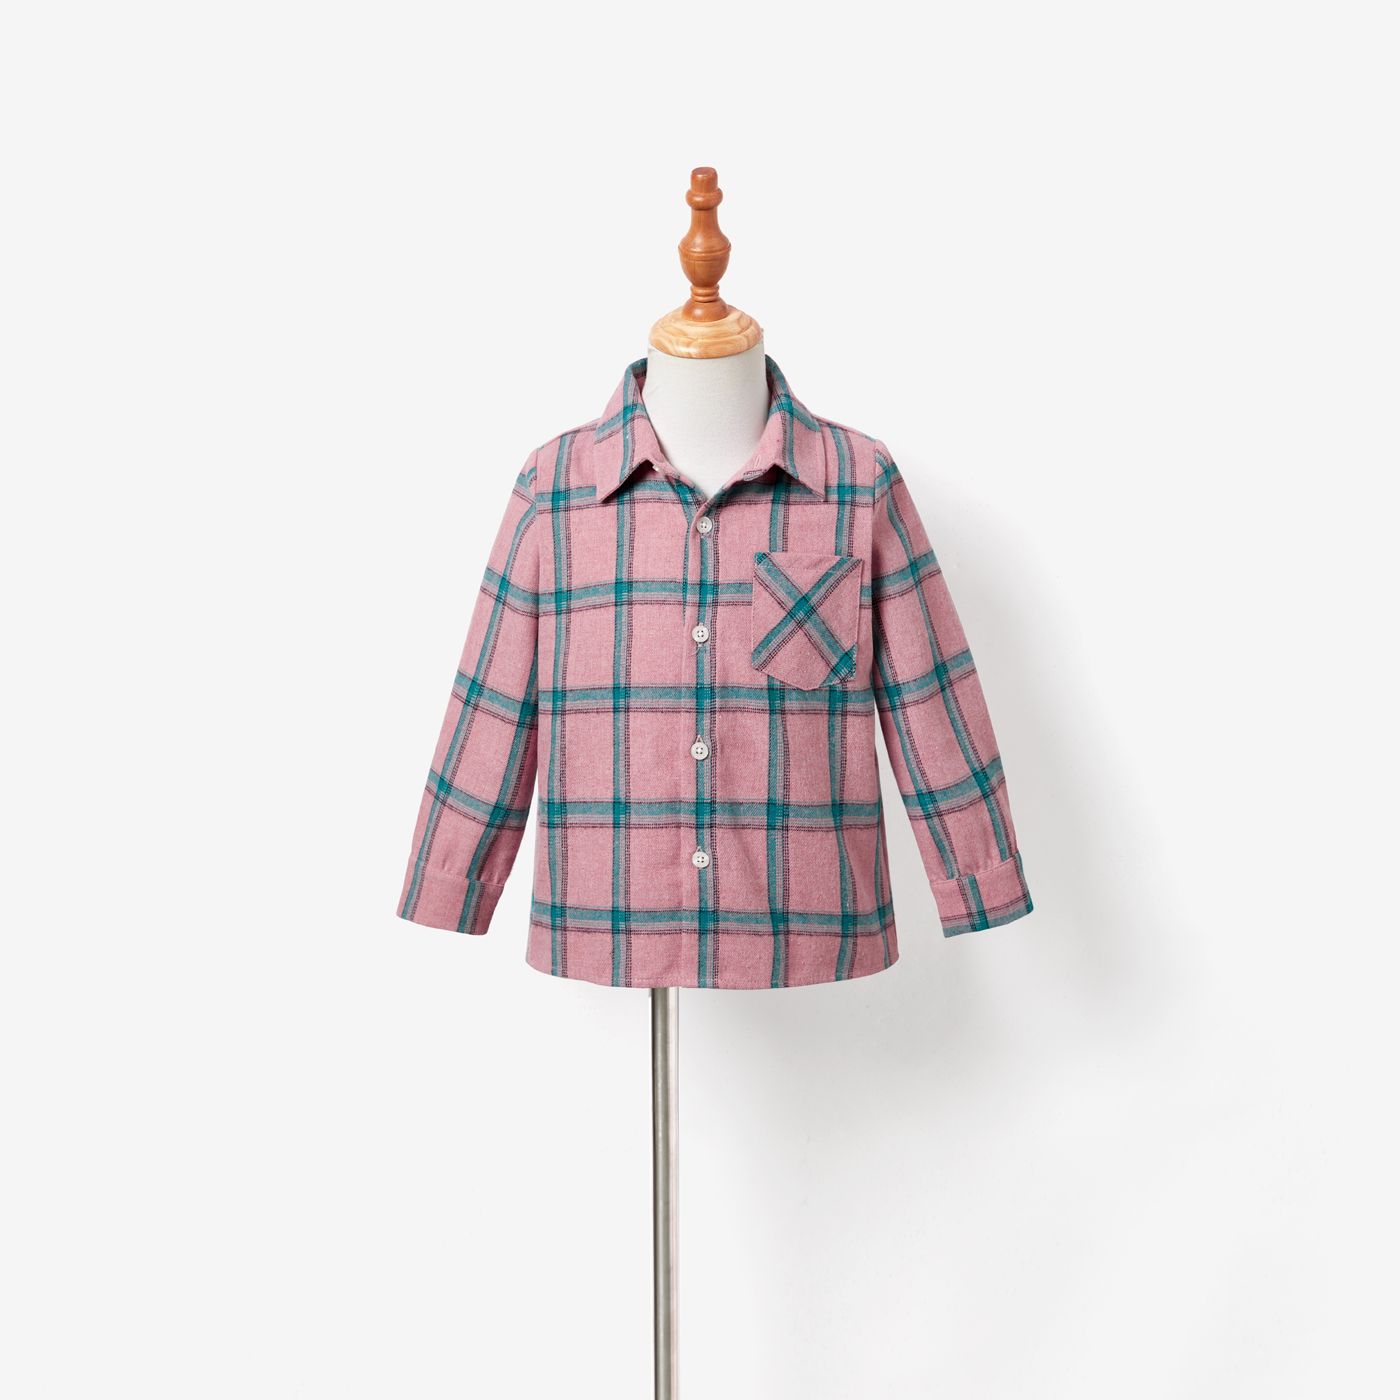 Family Matching Pink Long Sleeve Plaid Shirts Tops And Belted Mesh Dresses Sets